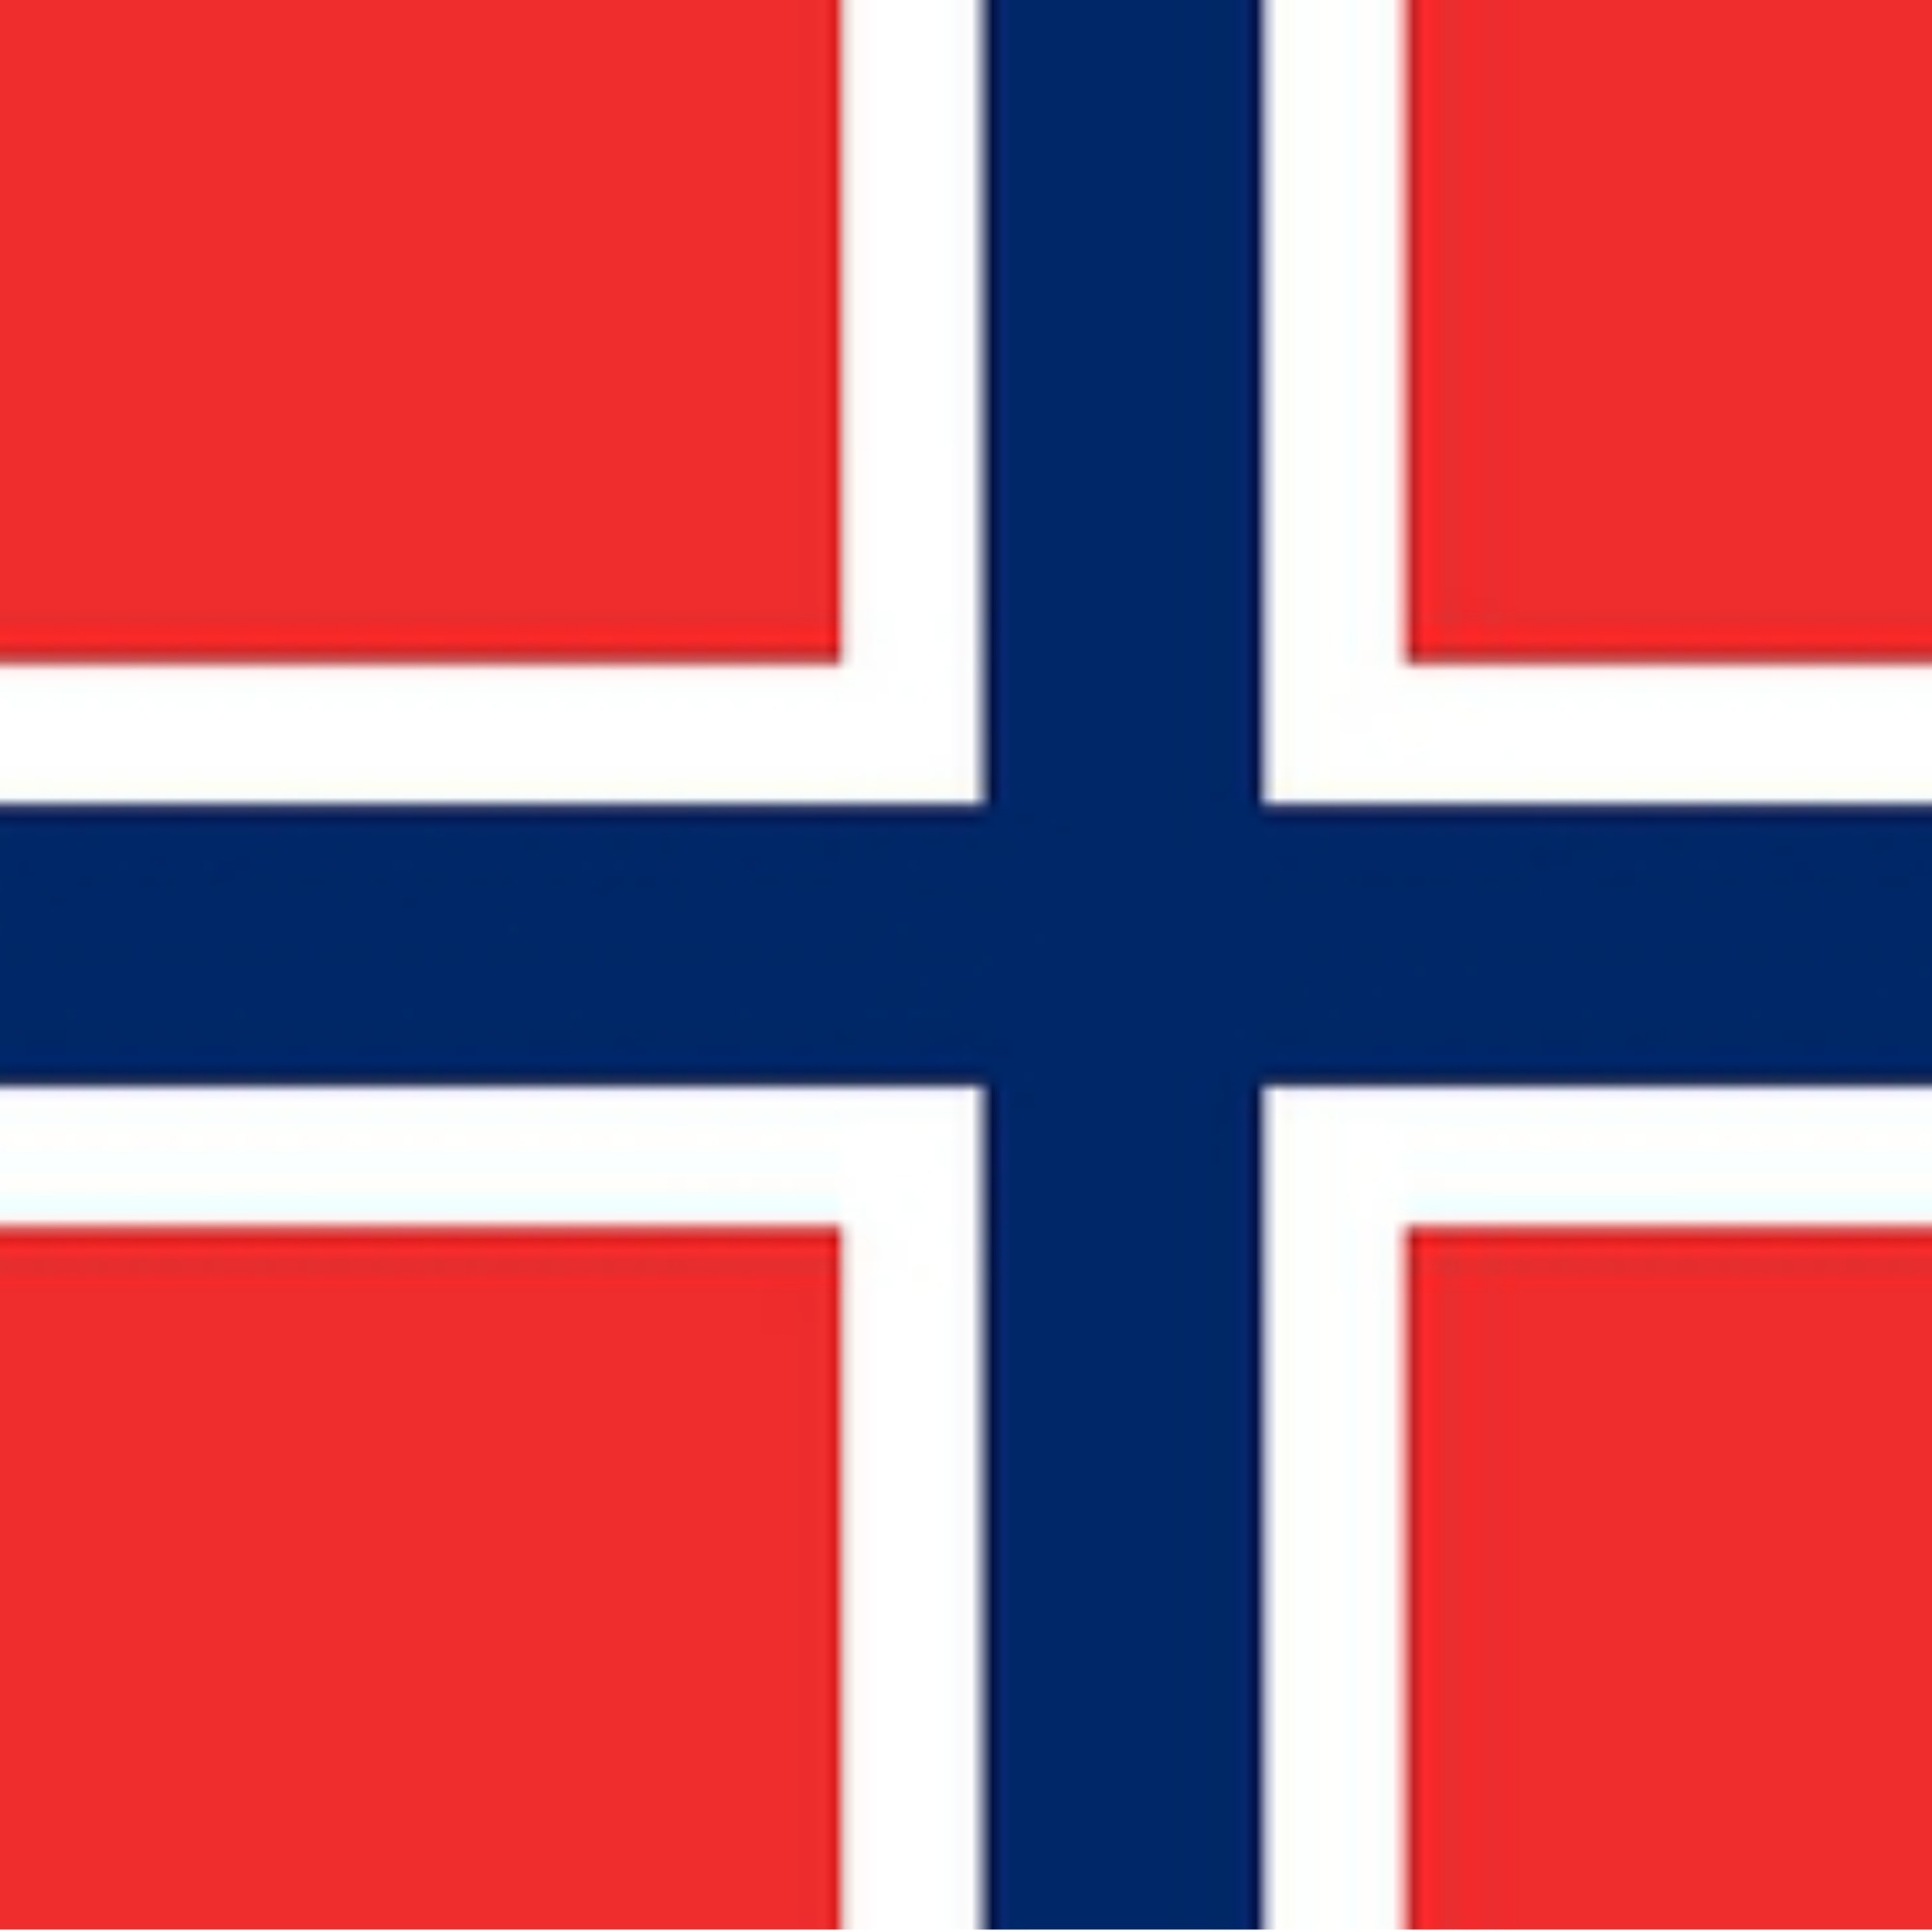 Honorary Consulate of Norway (Torrevieja)